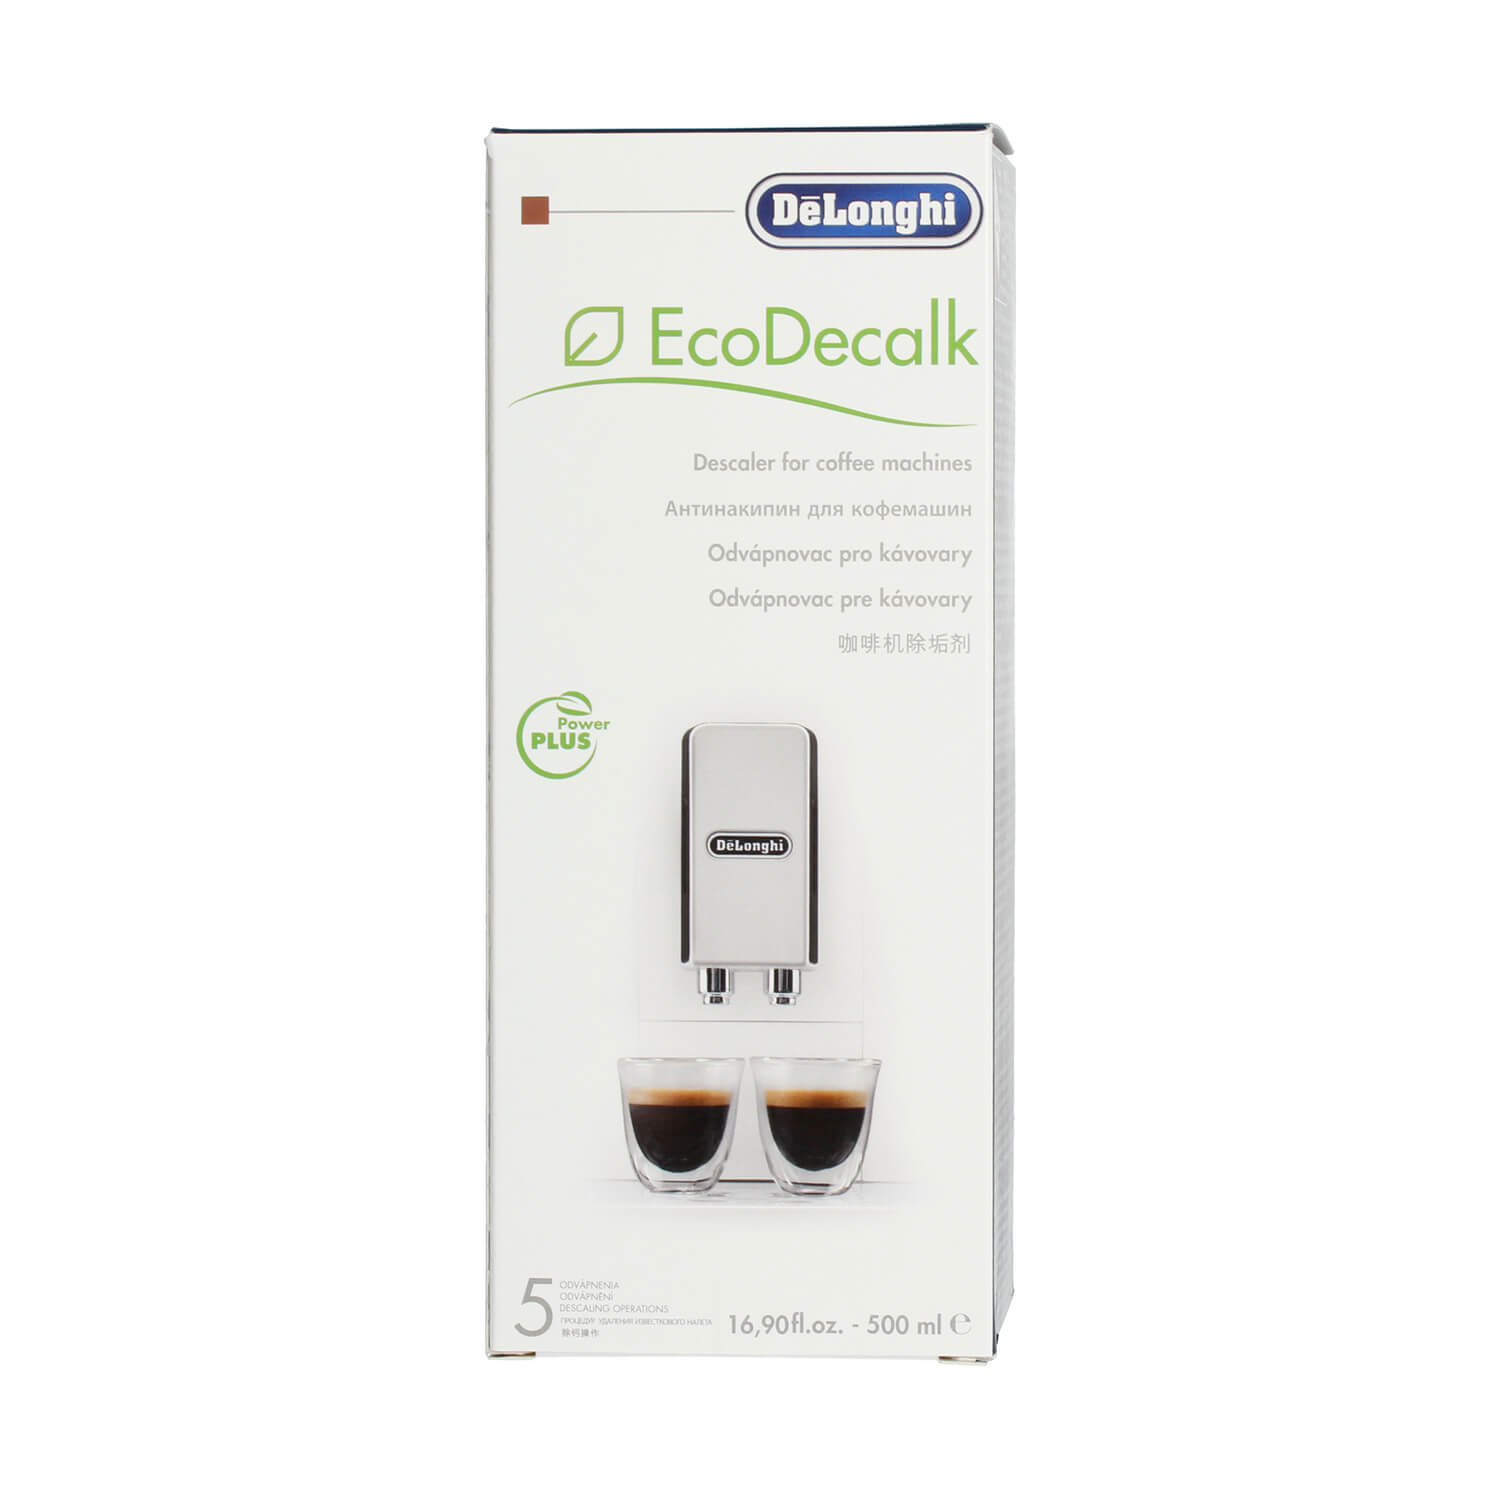 Our Point of View on De'Longhi EcoDecalk Descaler 